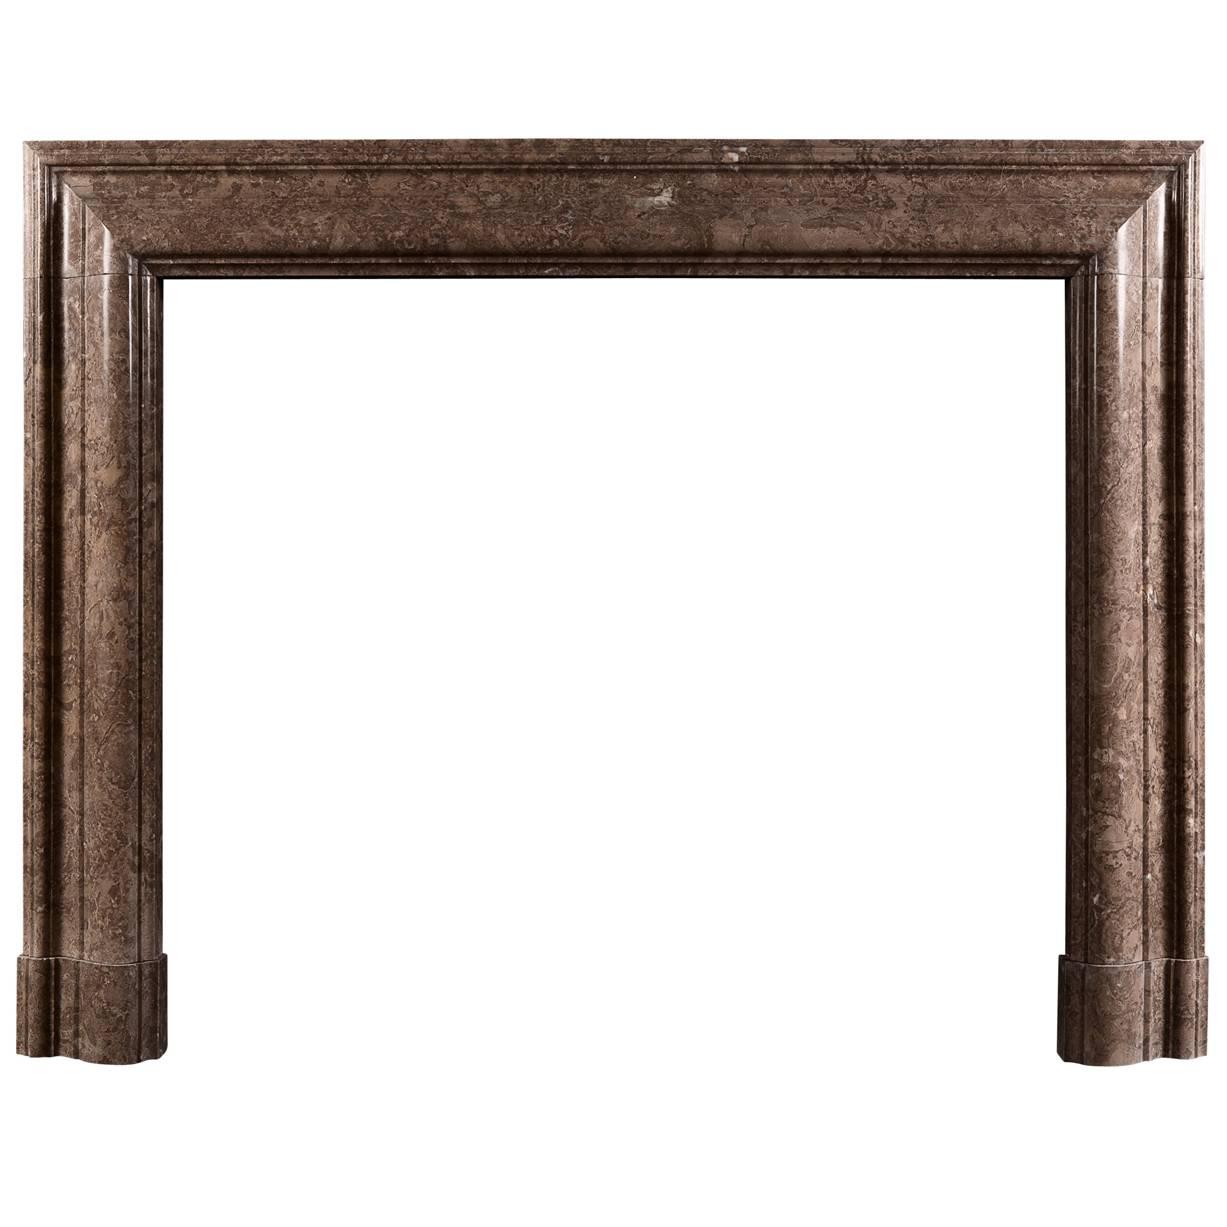 Bolection Fireplace Mantel in Napoleon Brown or Beige Marble